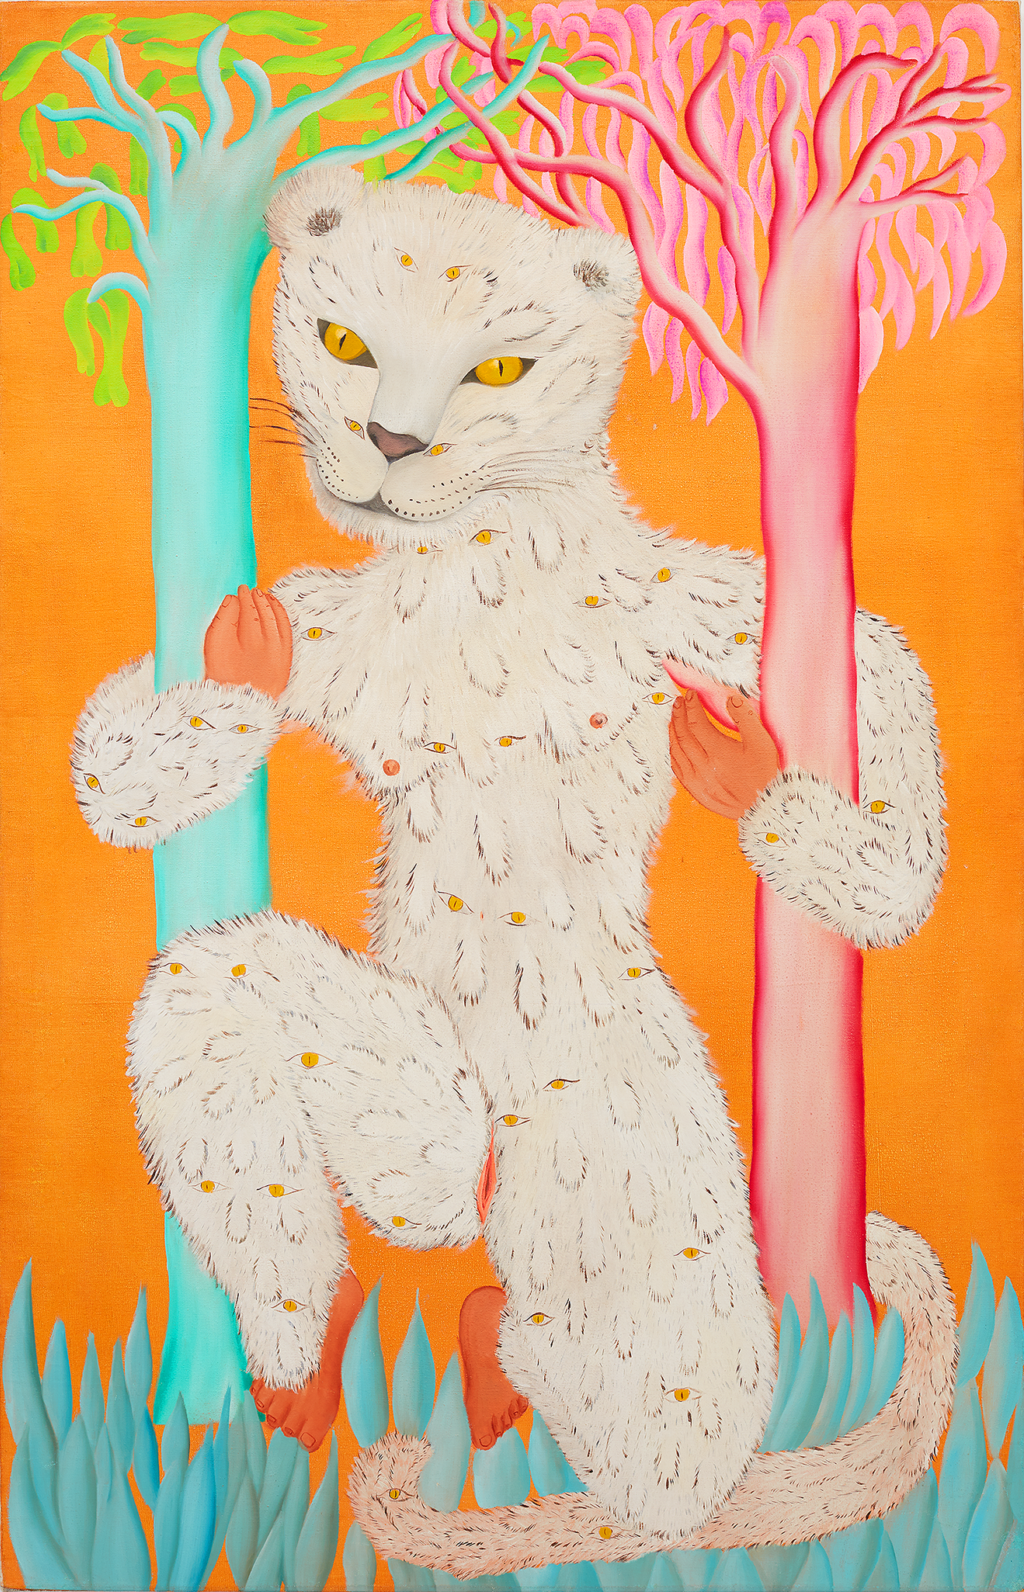 Artwork titled Leoparda de Ojitos. A humanoid leopard kneels between two small trees. The image is drawn with bright, neon colors.